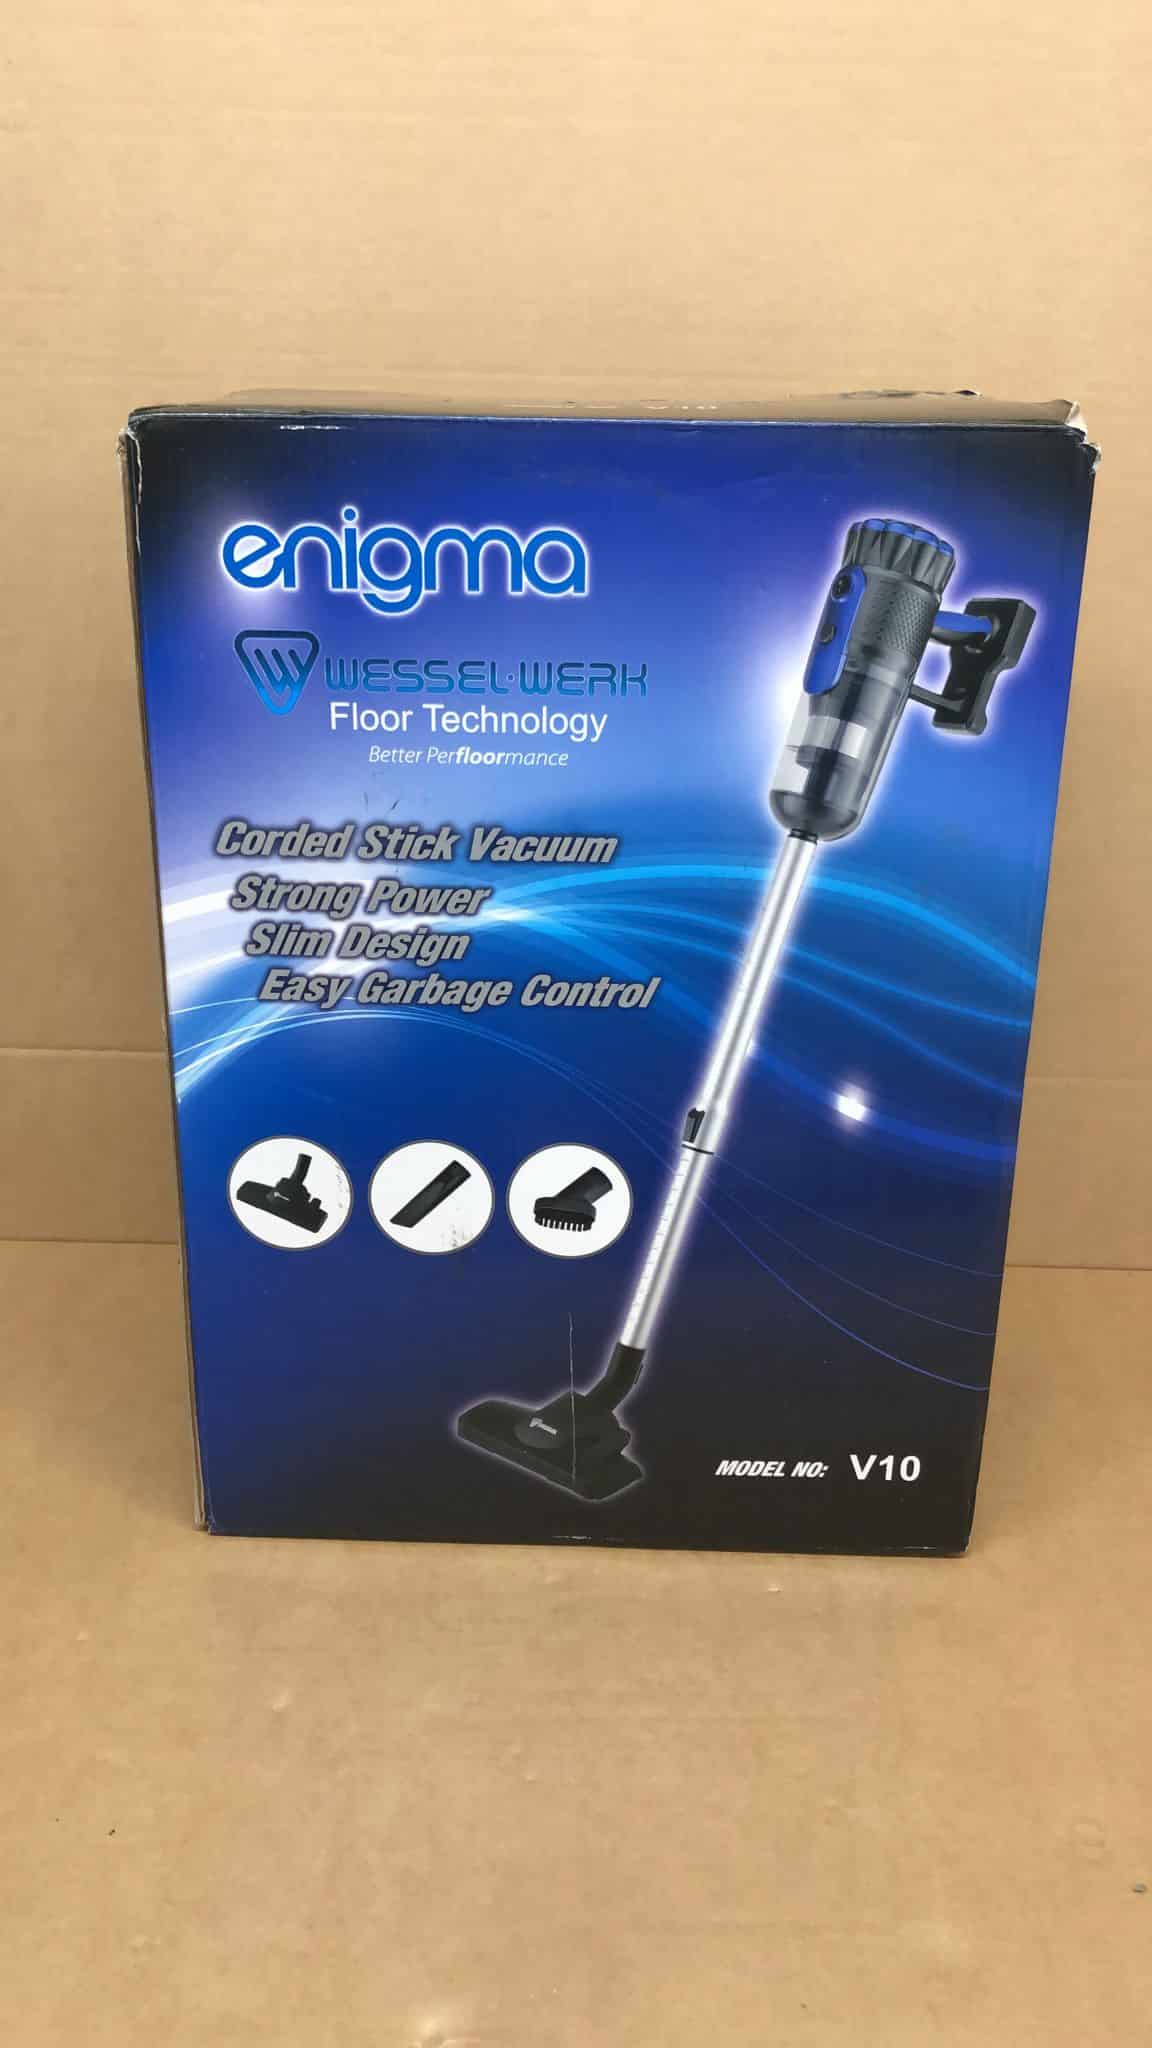 Enigma 600w Corded 3-in-1 Upright Handheld Stick Vacuum Cleaner 1202 (Copy)